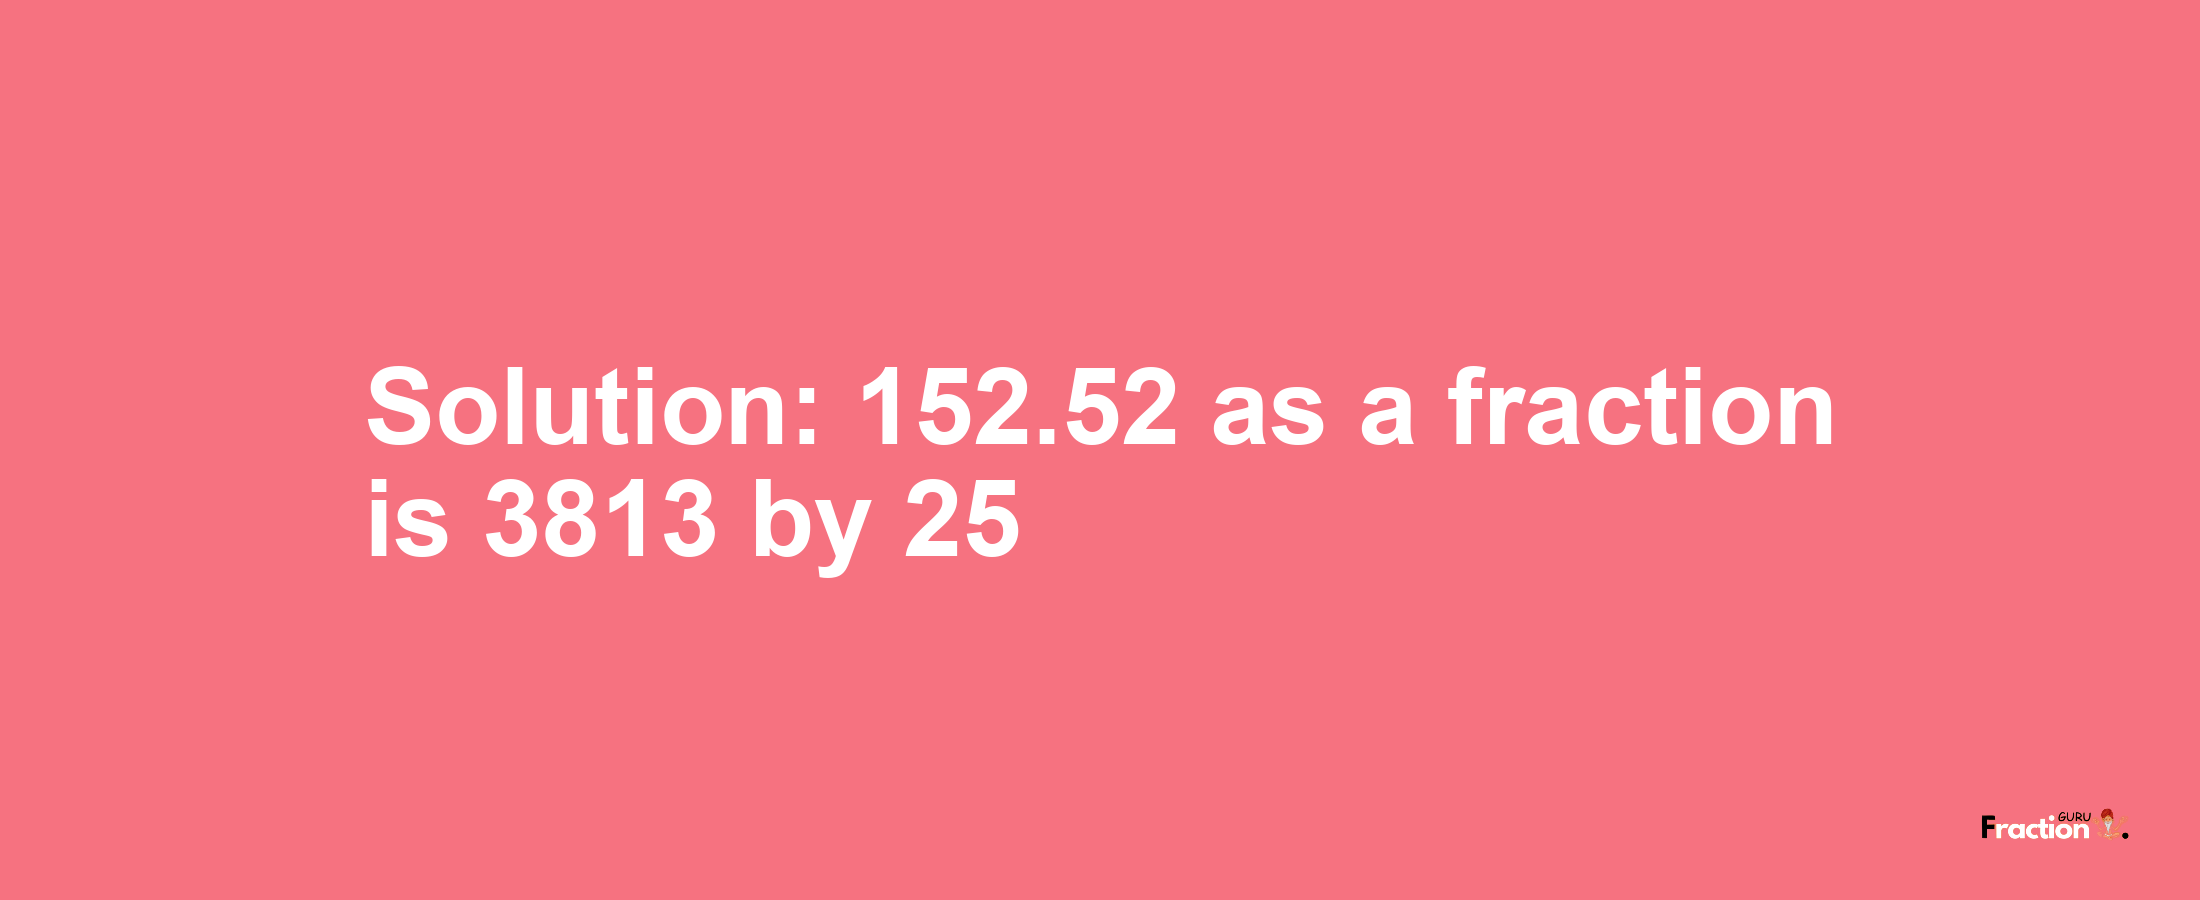 Solution:152.52 as a fraction is 3813/25